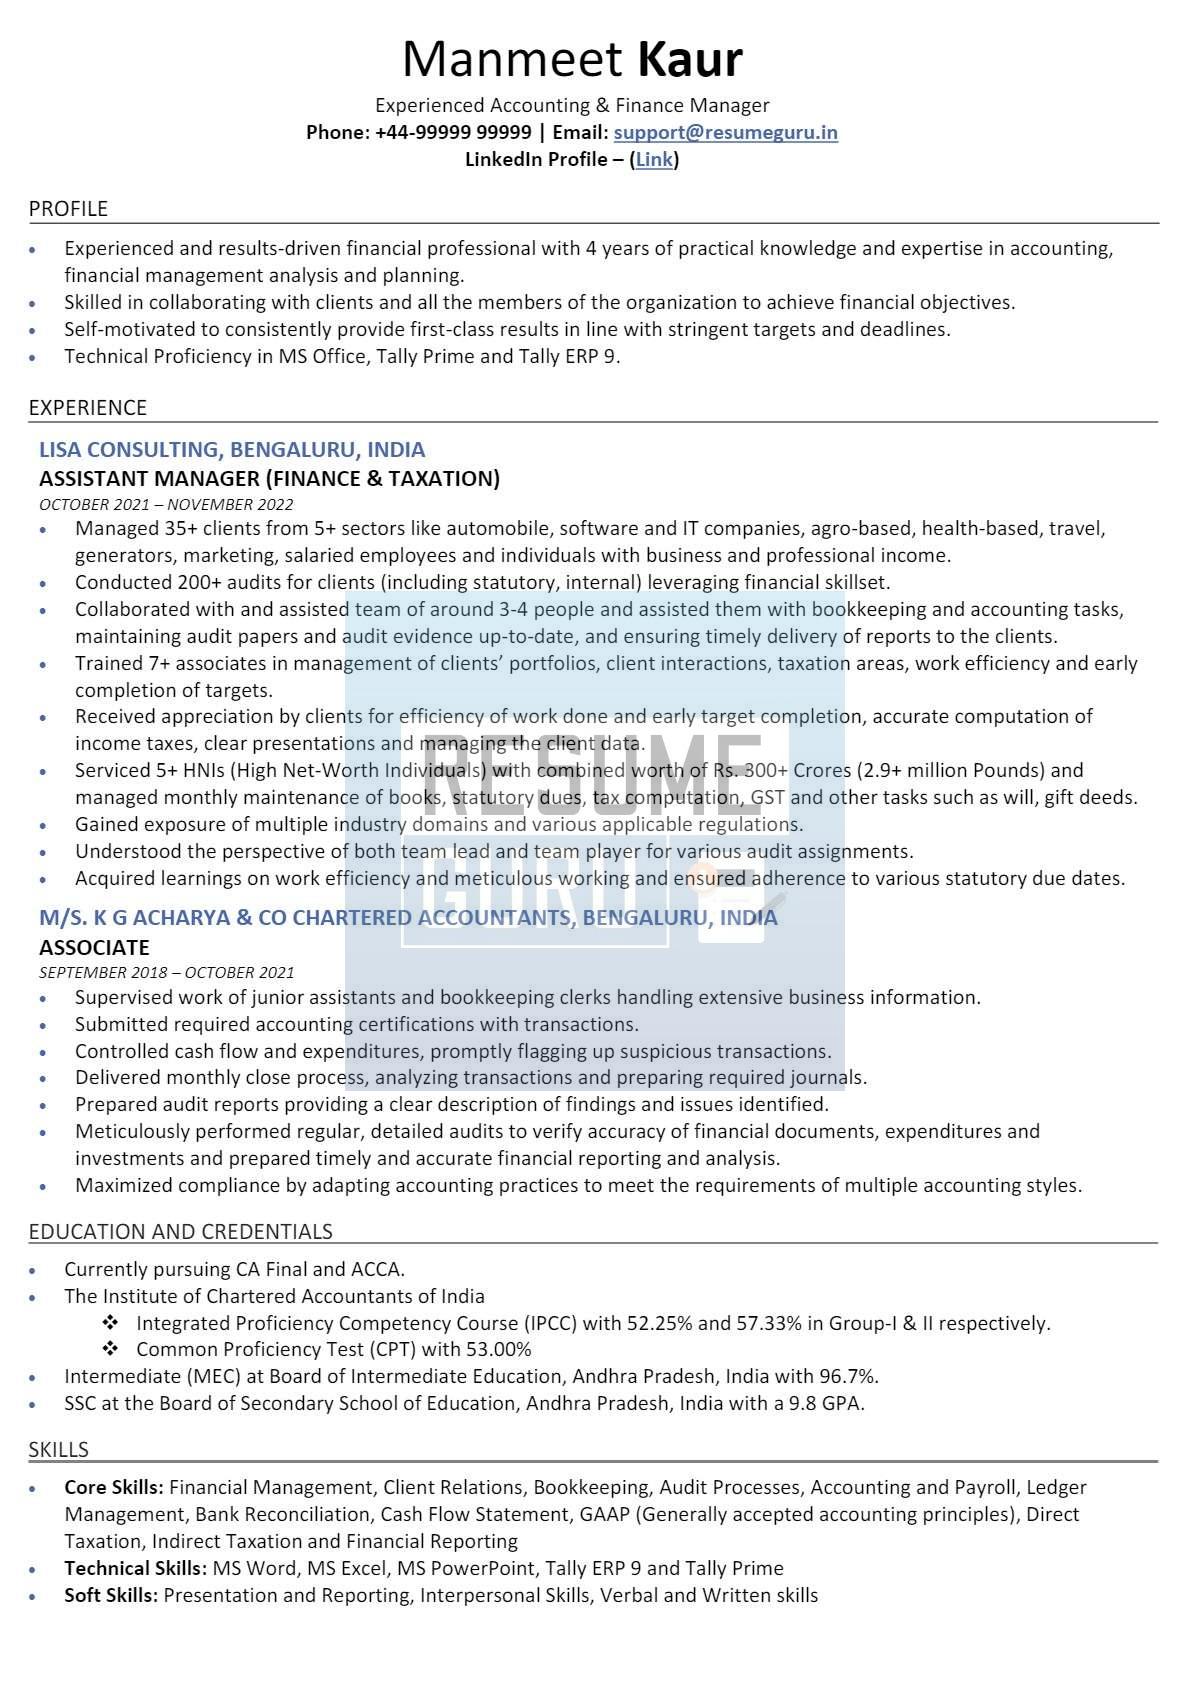 Mid-Level Accounting and Finance Manager_1